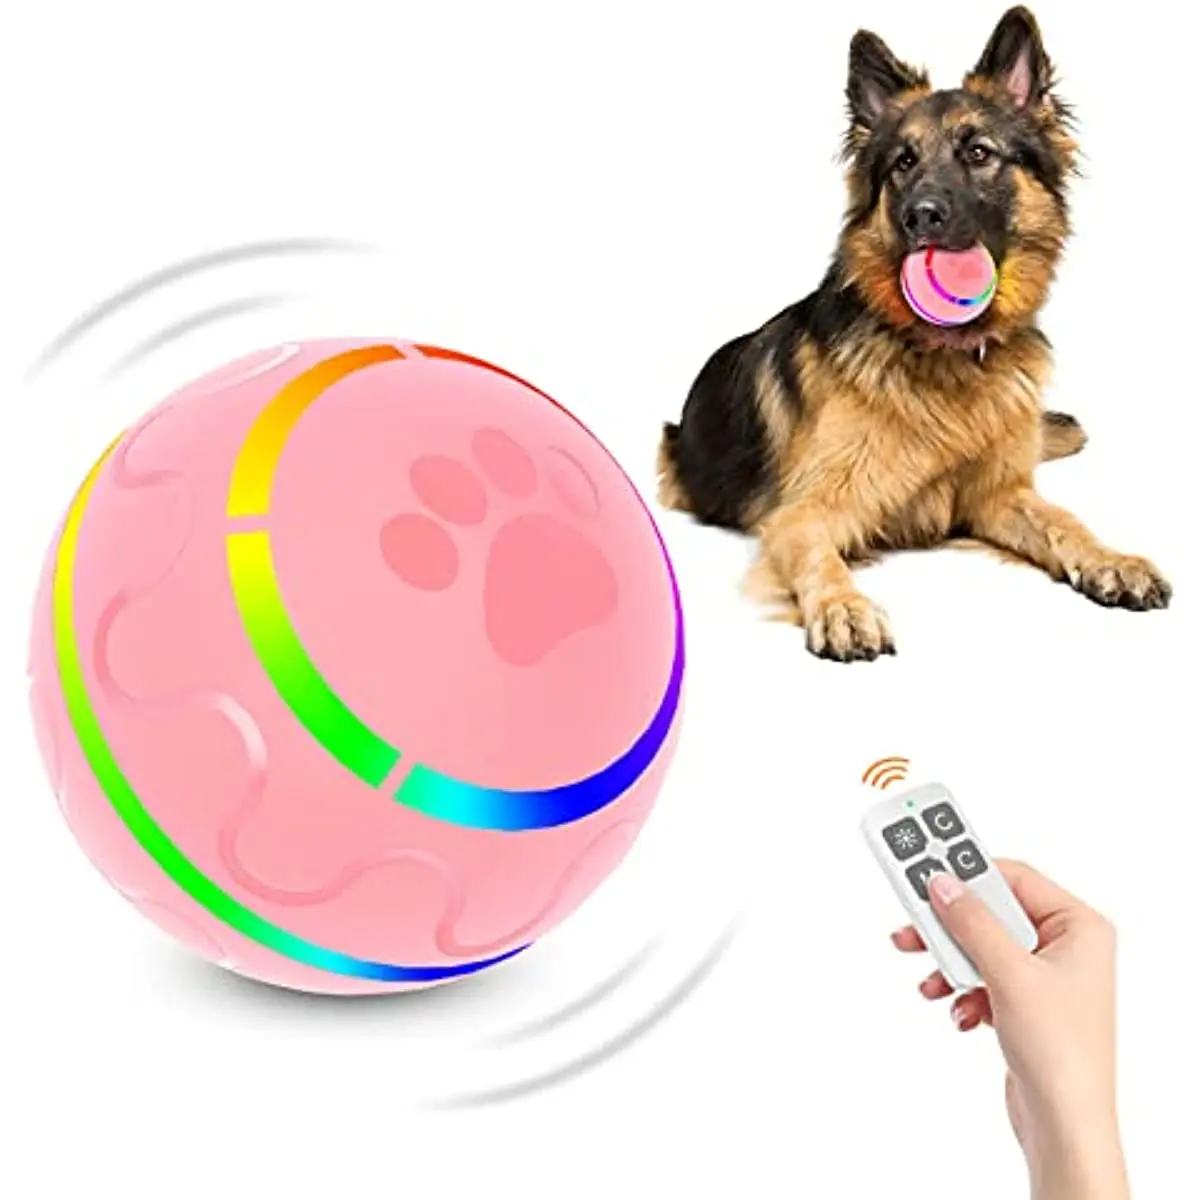 A pink flashing ball with a remote control next to a big pup's paw.